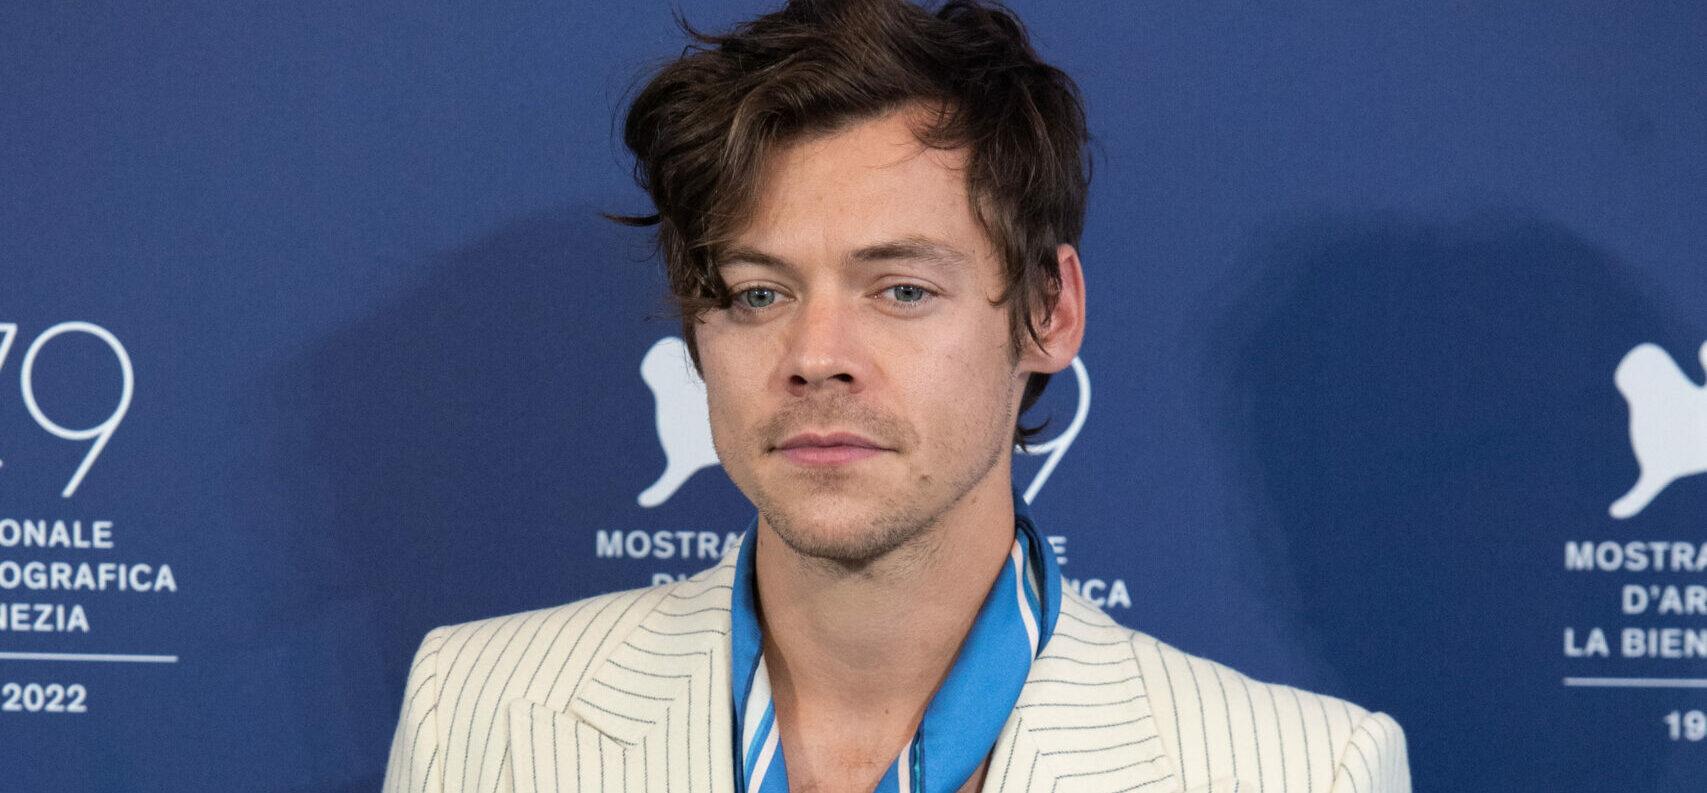 Harry Styles at the 79th Venice International Film Festival - "Don't Worry Darling" Photocall